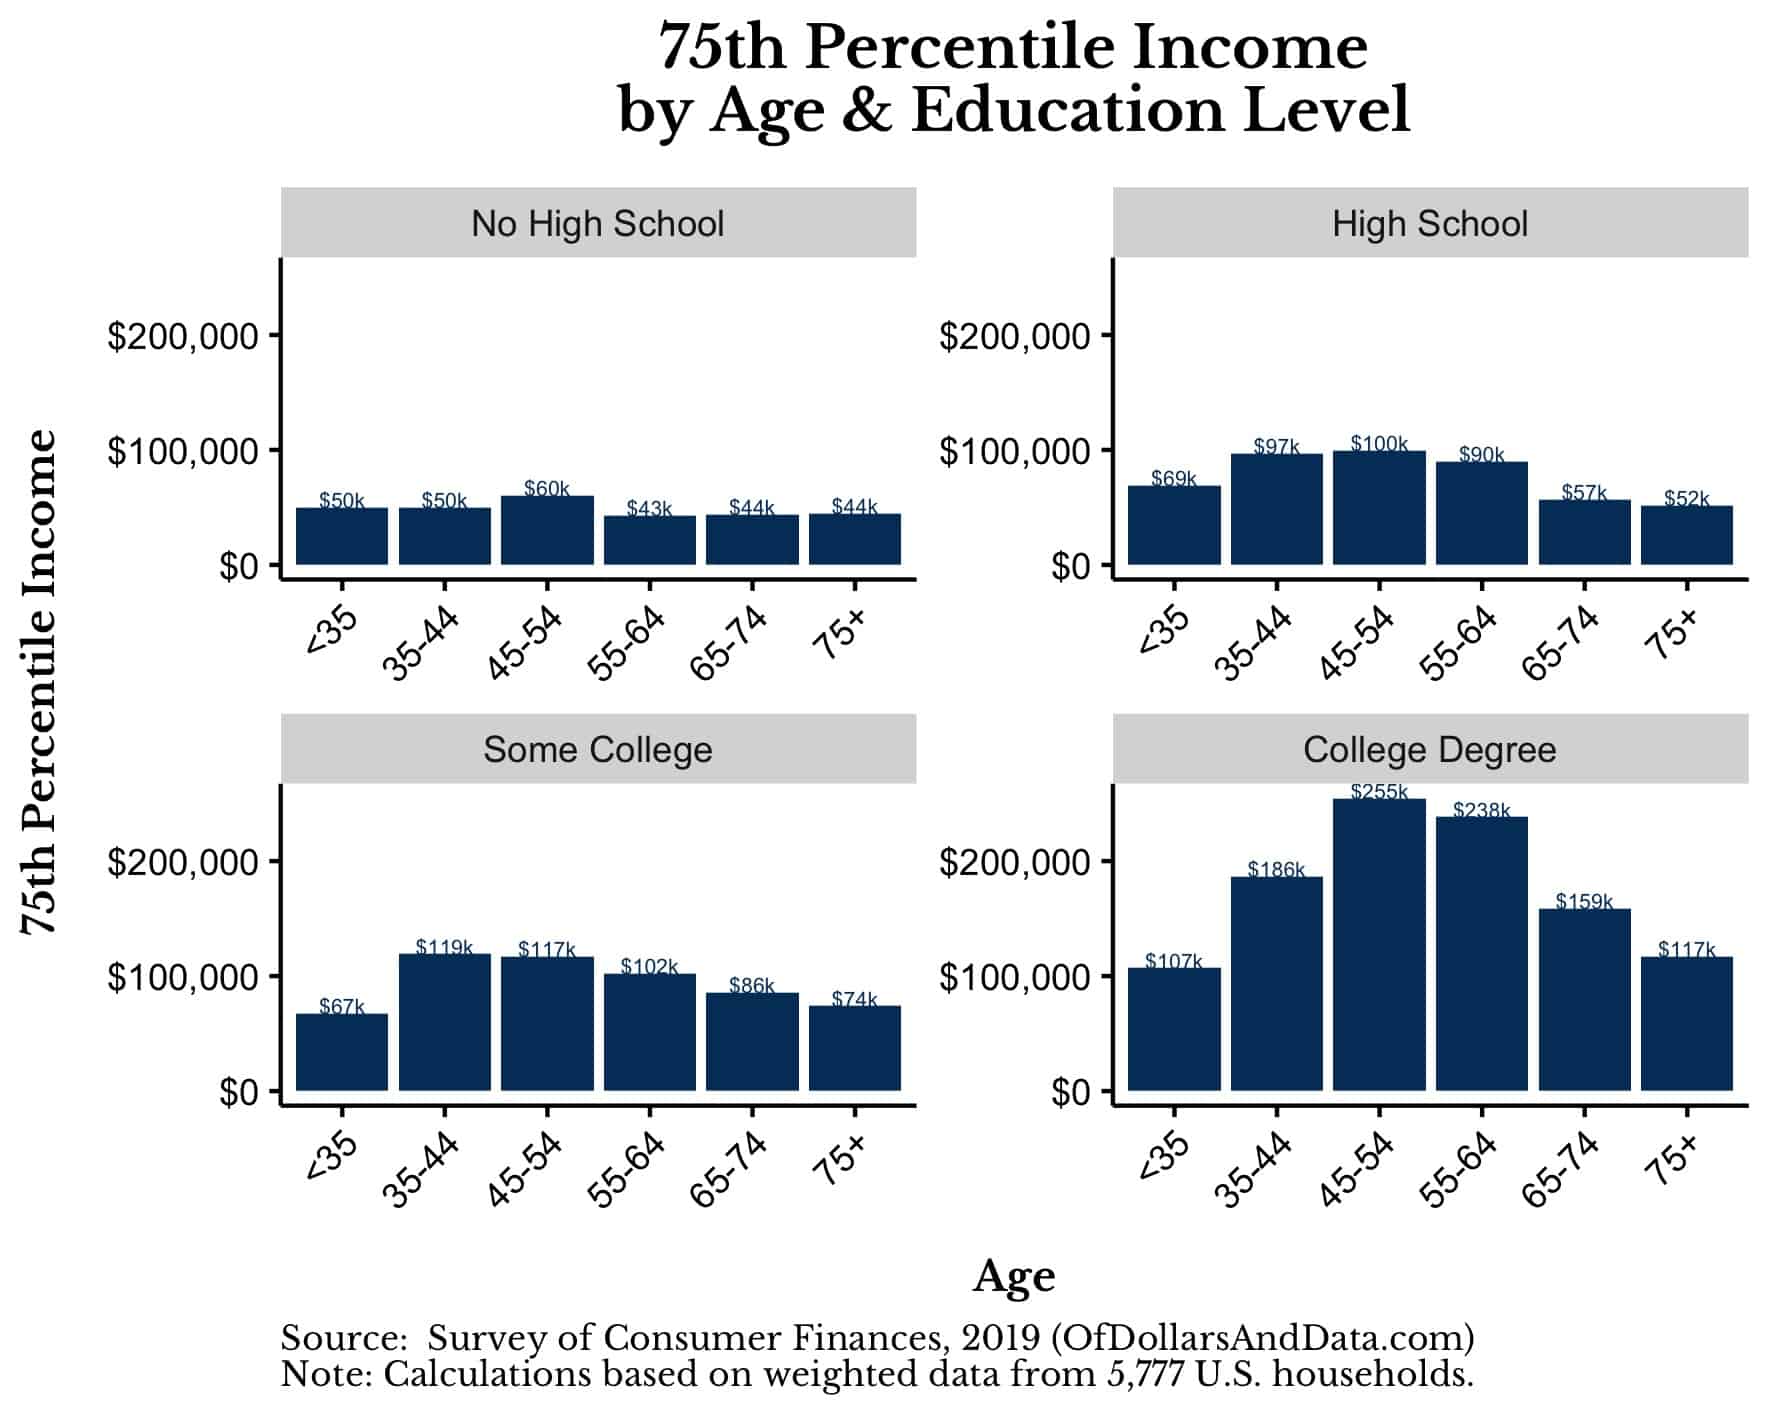 75th percentile household income by age and education level in the U.S. from the 2019 Survey of Consumer Finances.